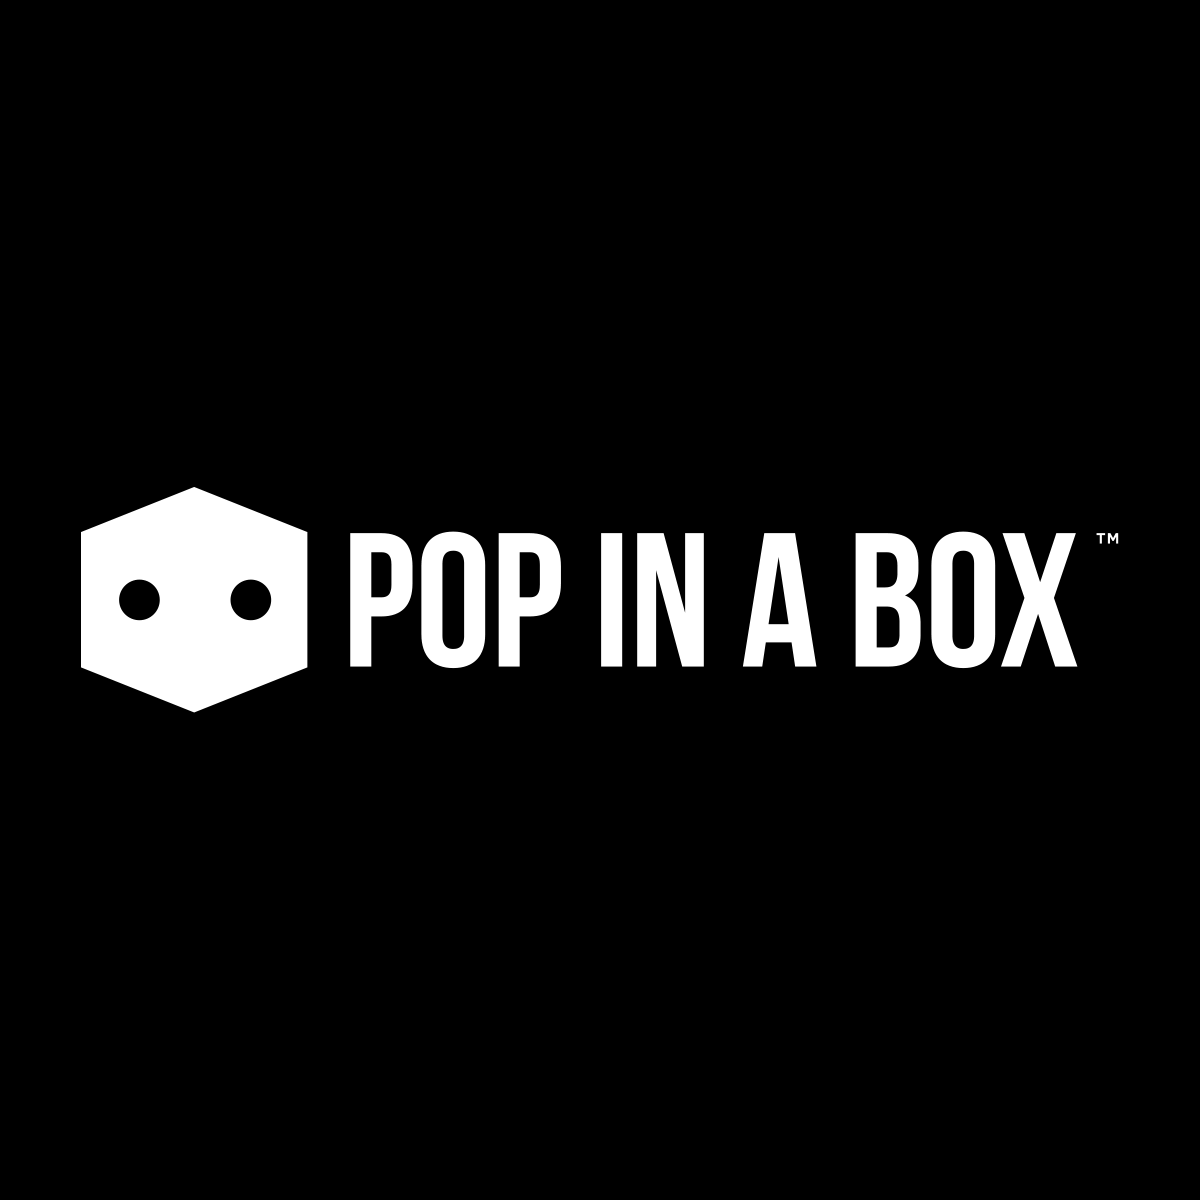 10% Off With Pop In A Box UK Coupon Code